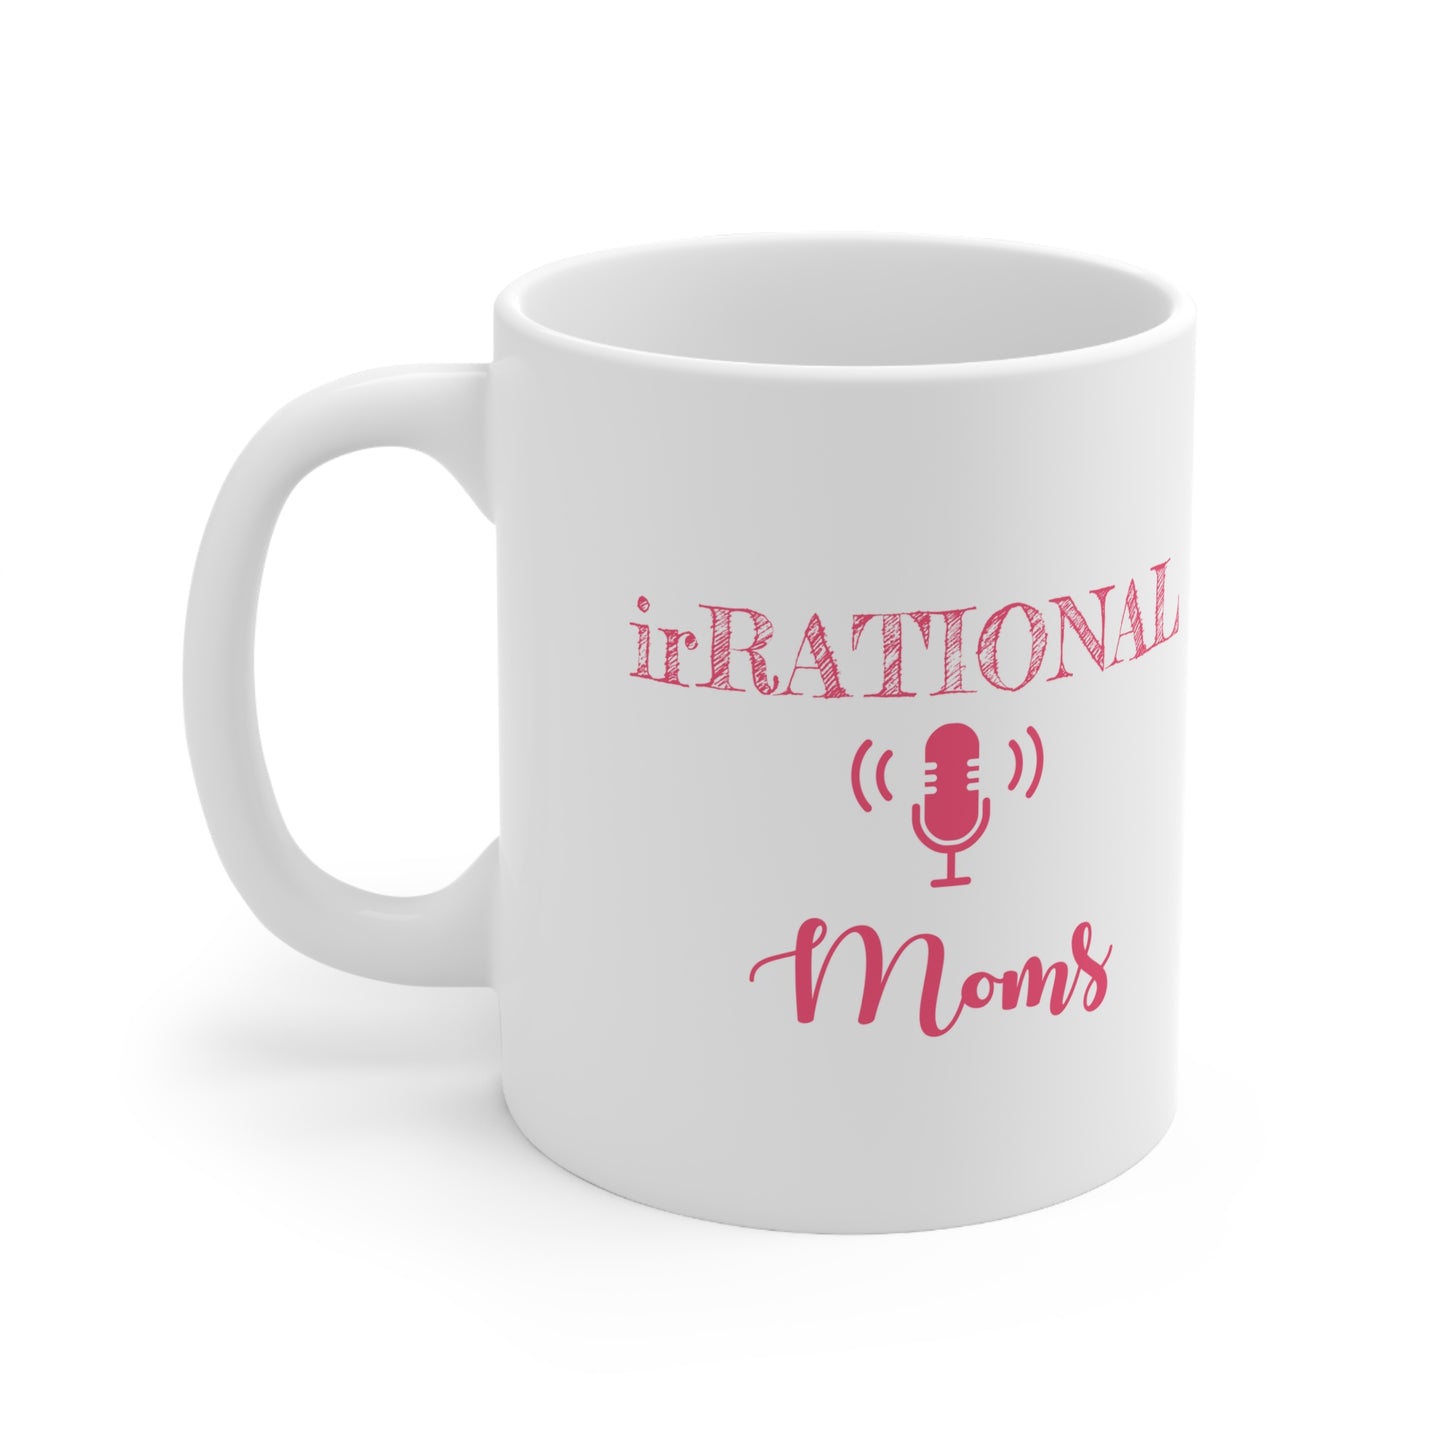 irRational Moms Coffee Cup